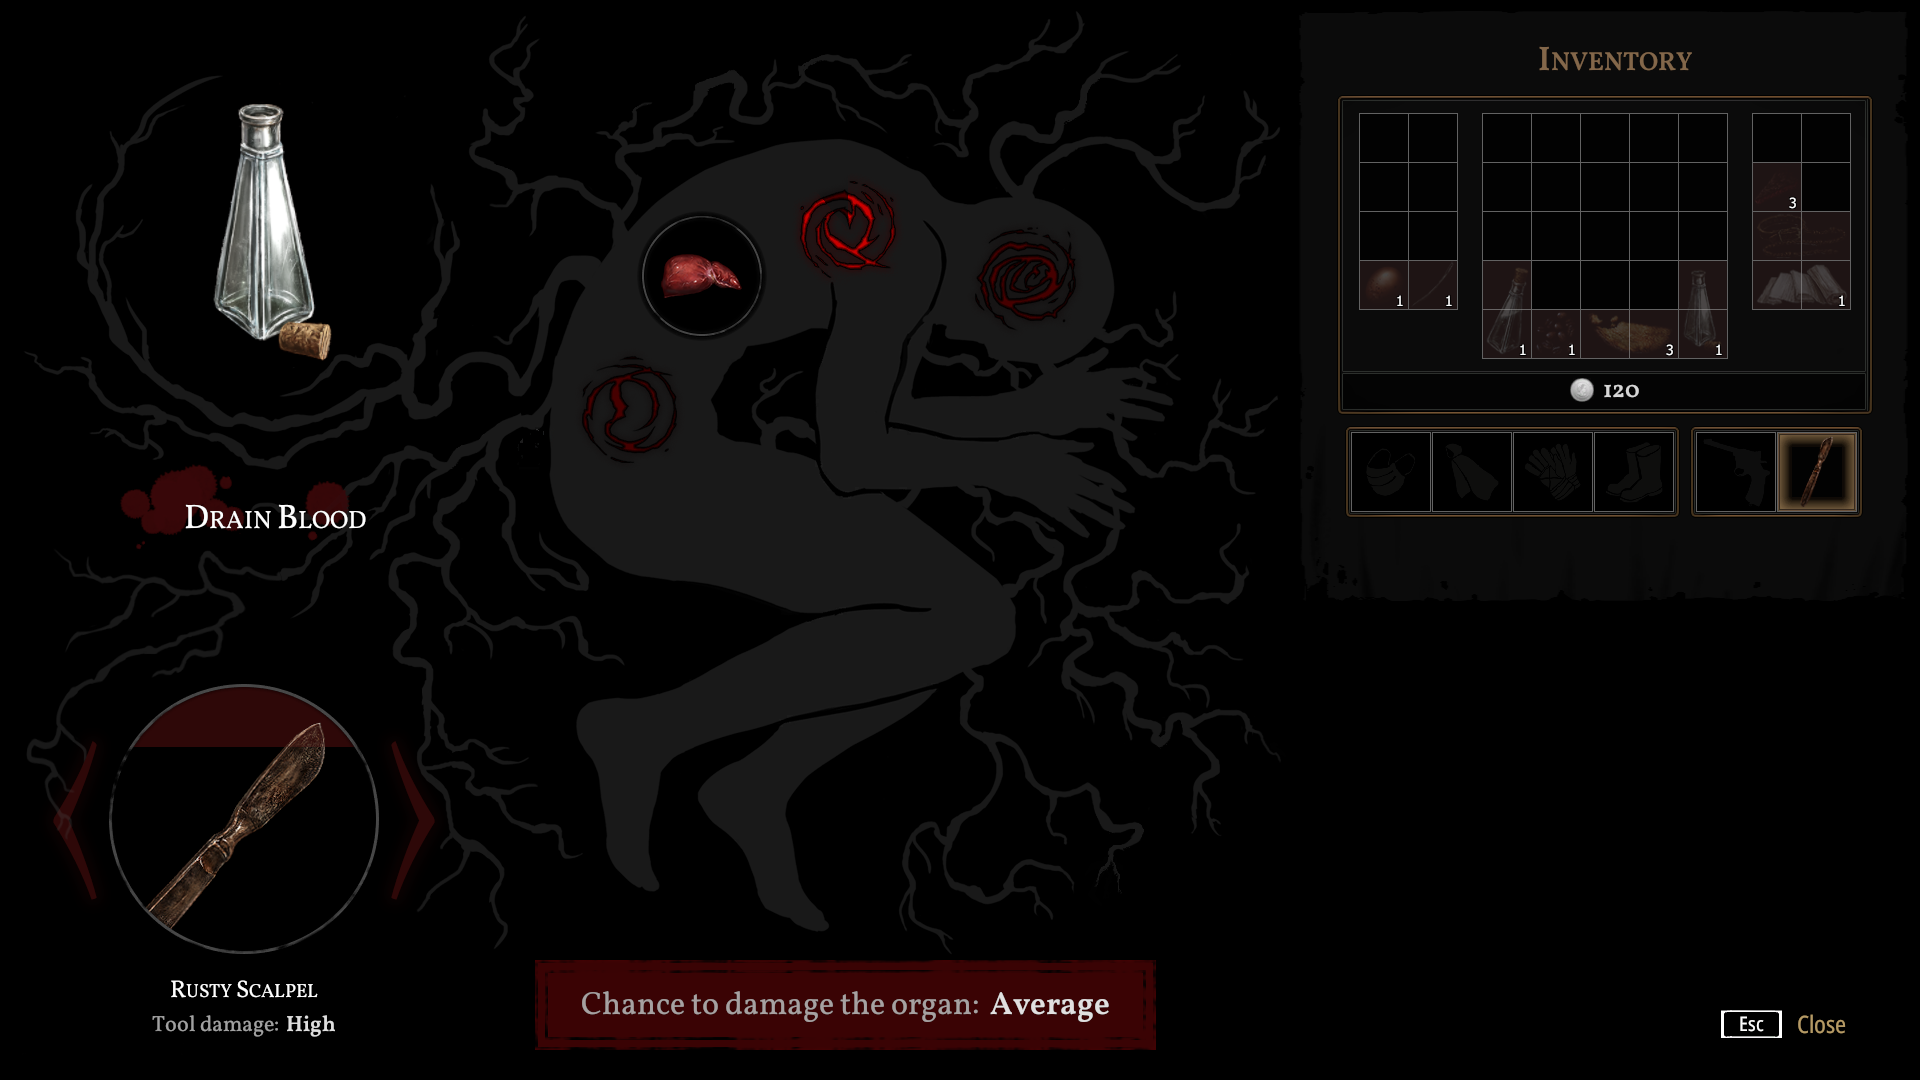 Screenshot of the Drain Blood screen from Pathologic 2. It shows the outline of a body curled in the fetal position with an organ in their torso highlighted. To the left is a vial with Drain Blood under it. At the bottom a banner reads: "chance to damage the organ: average"